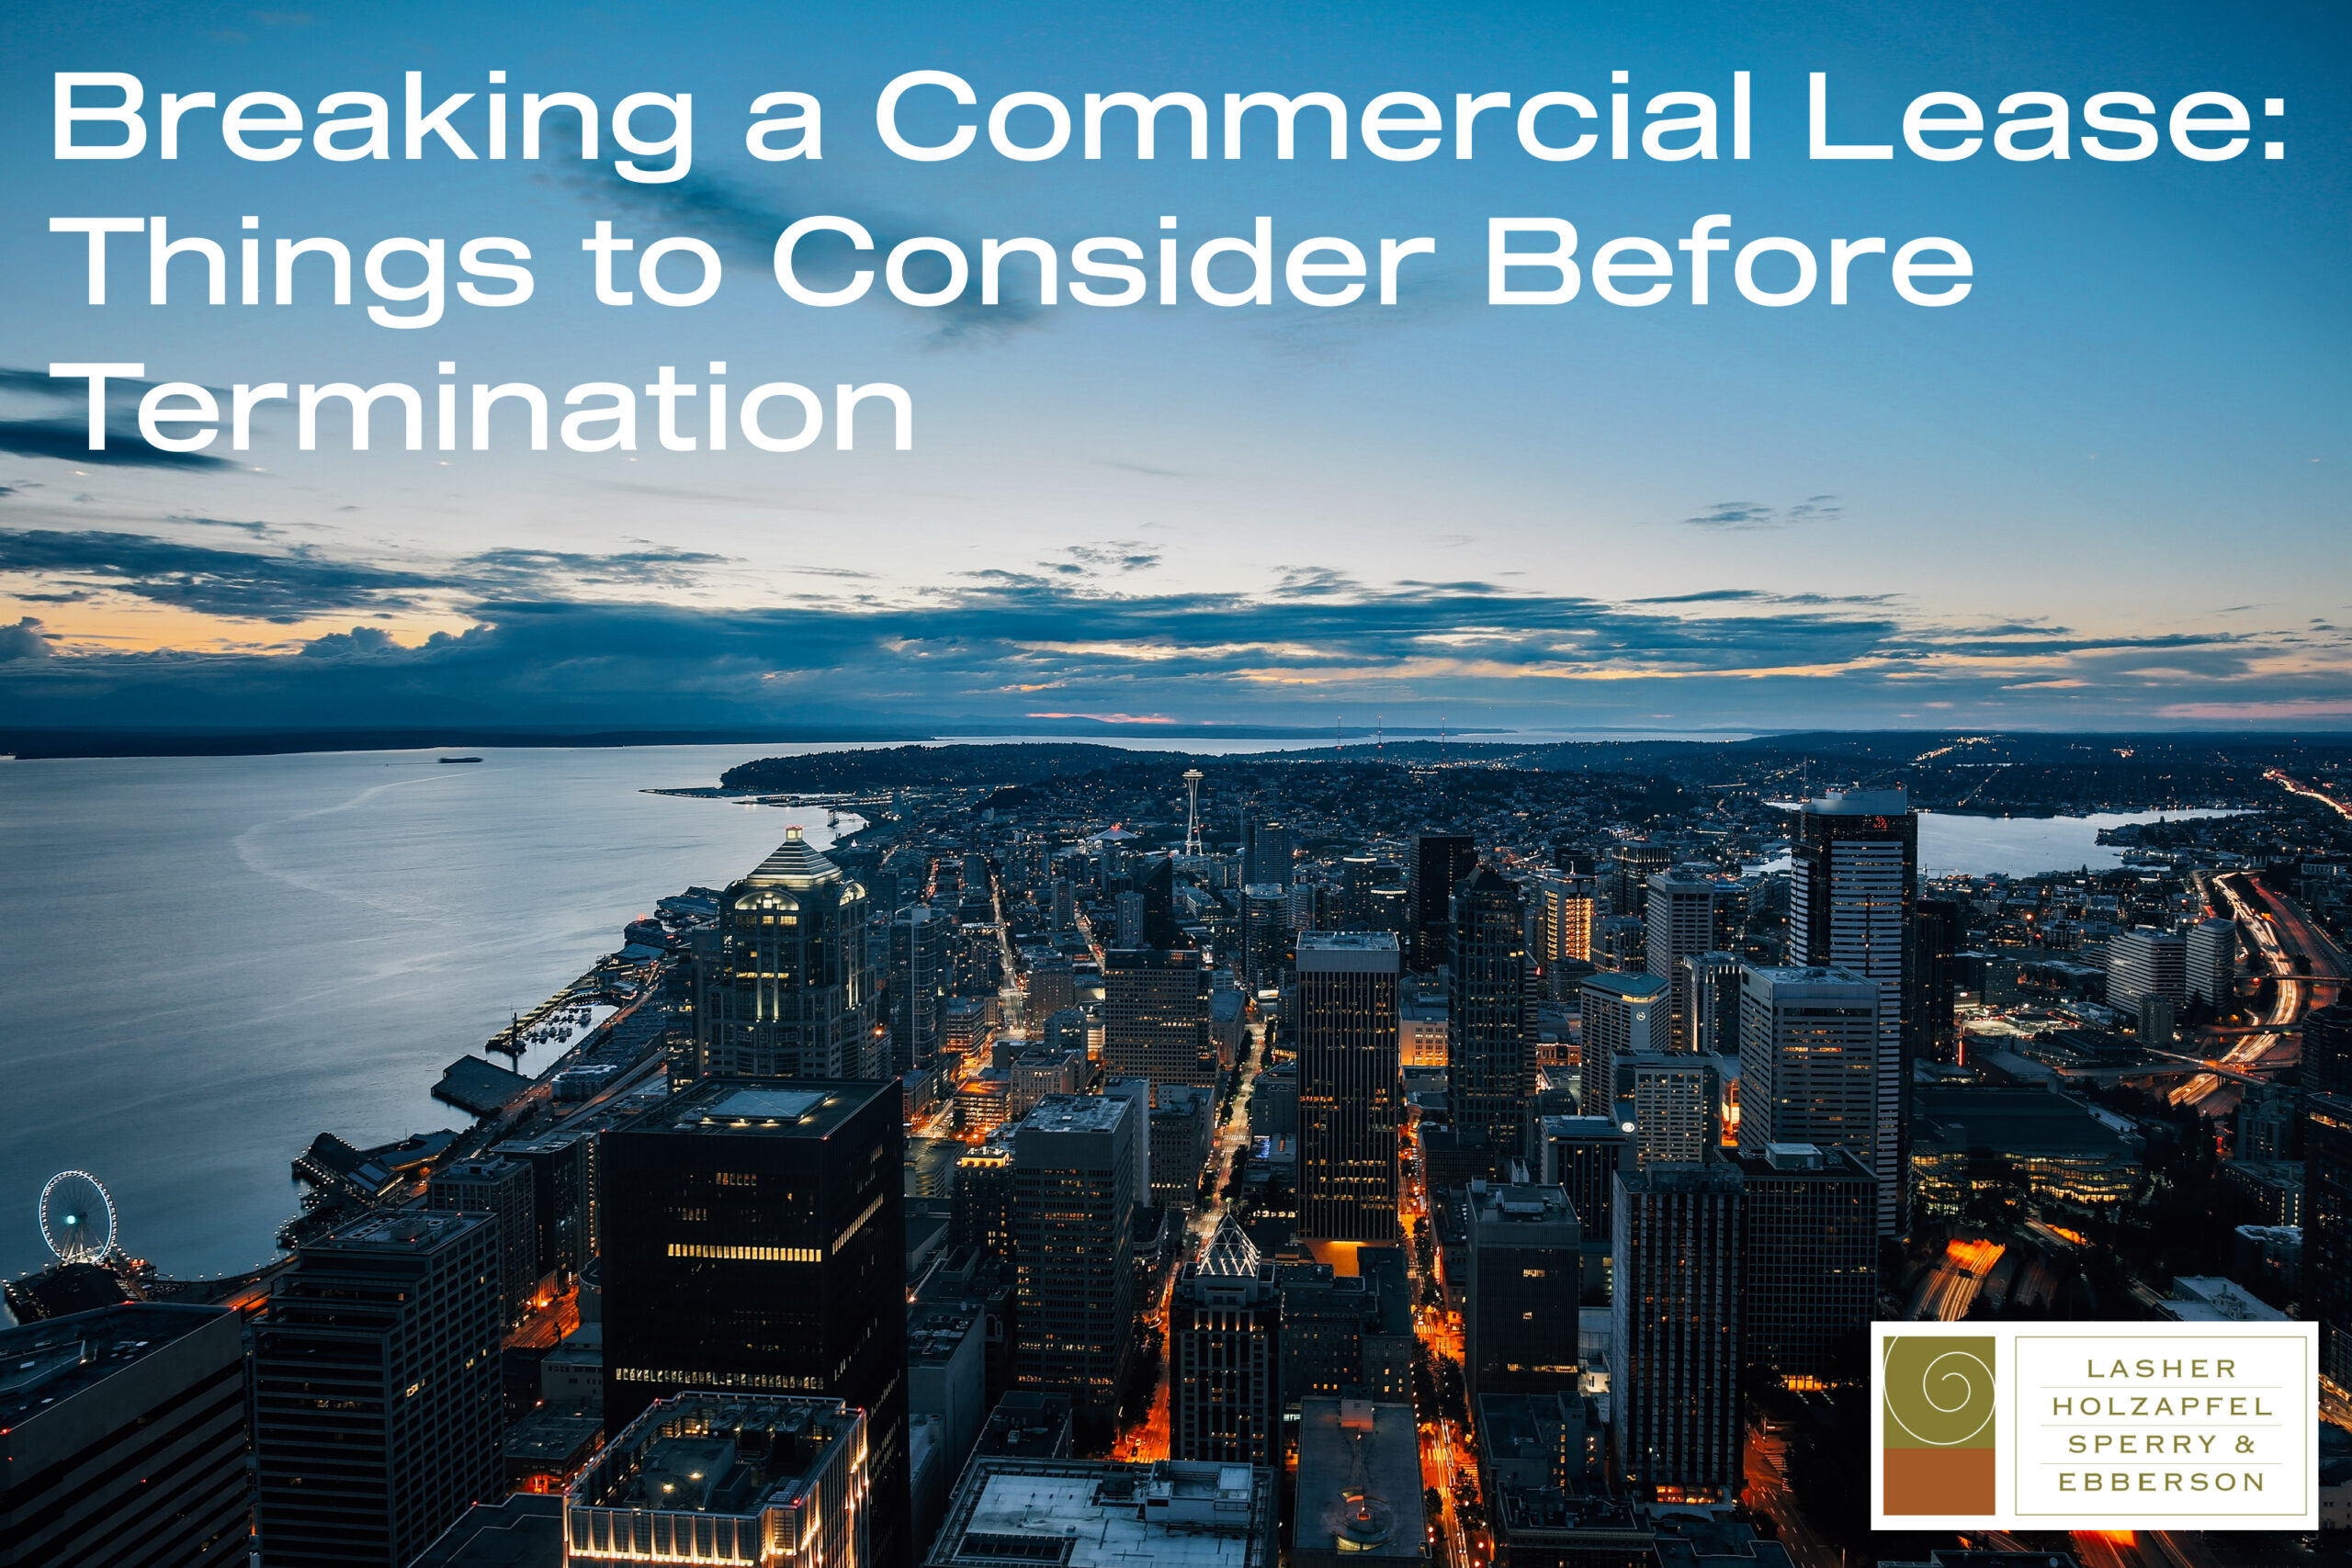 Breaking a Commercial Lease: Things to Consider Before Termination